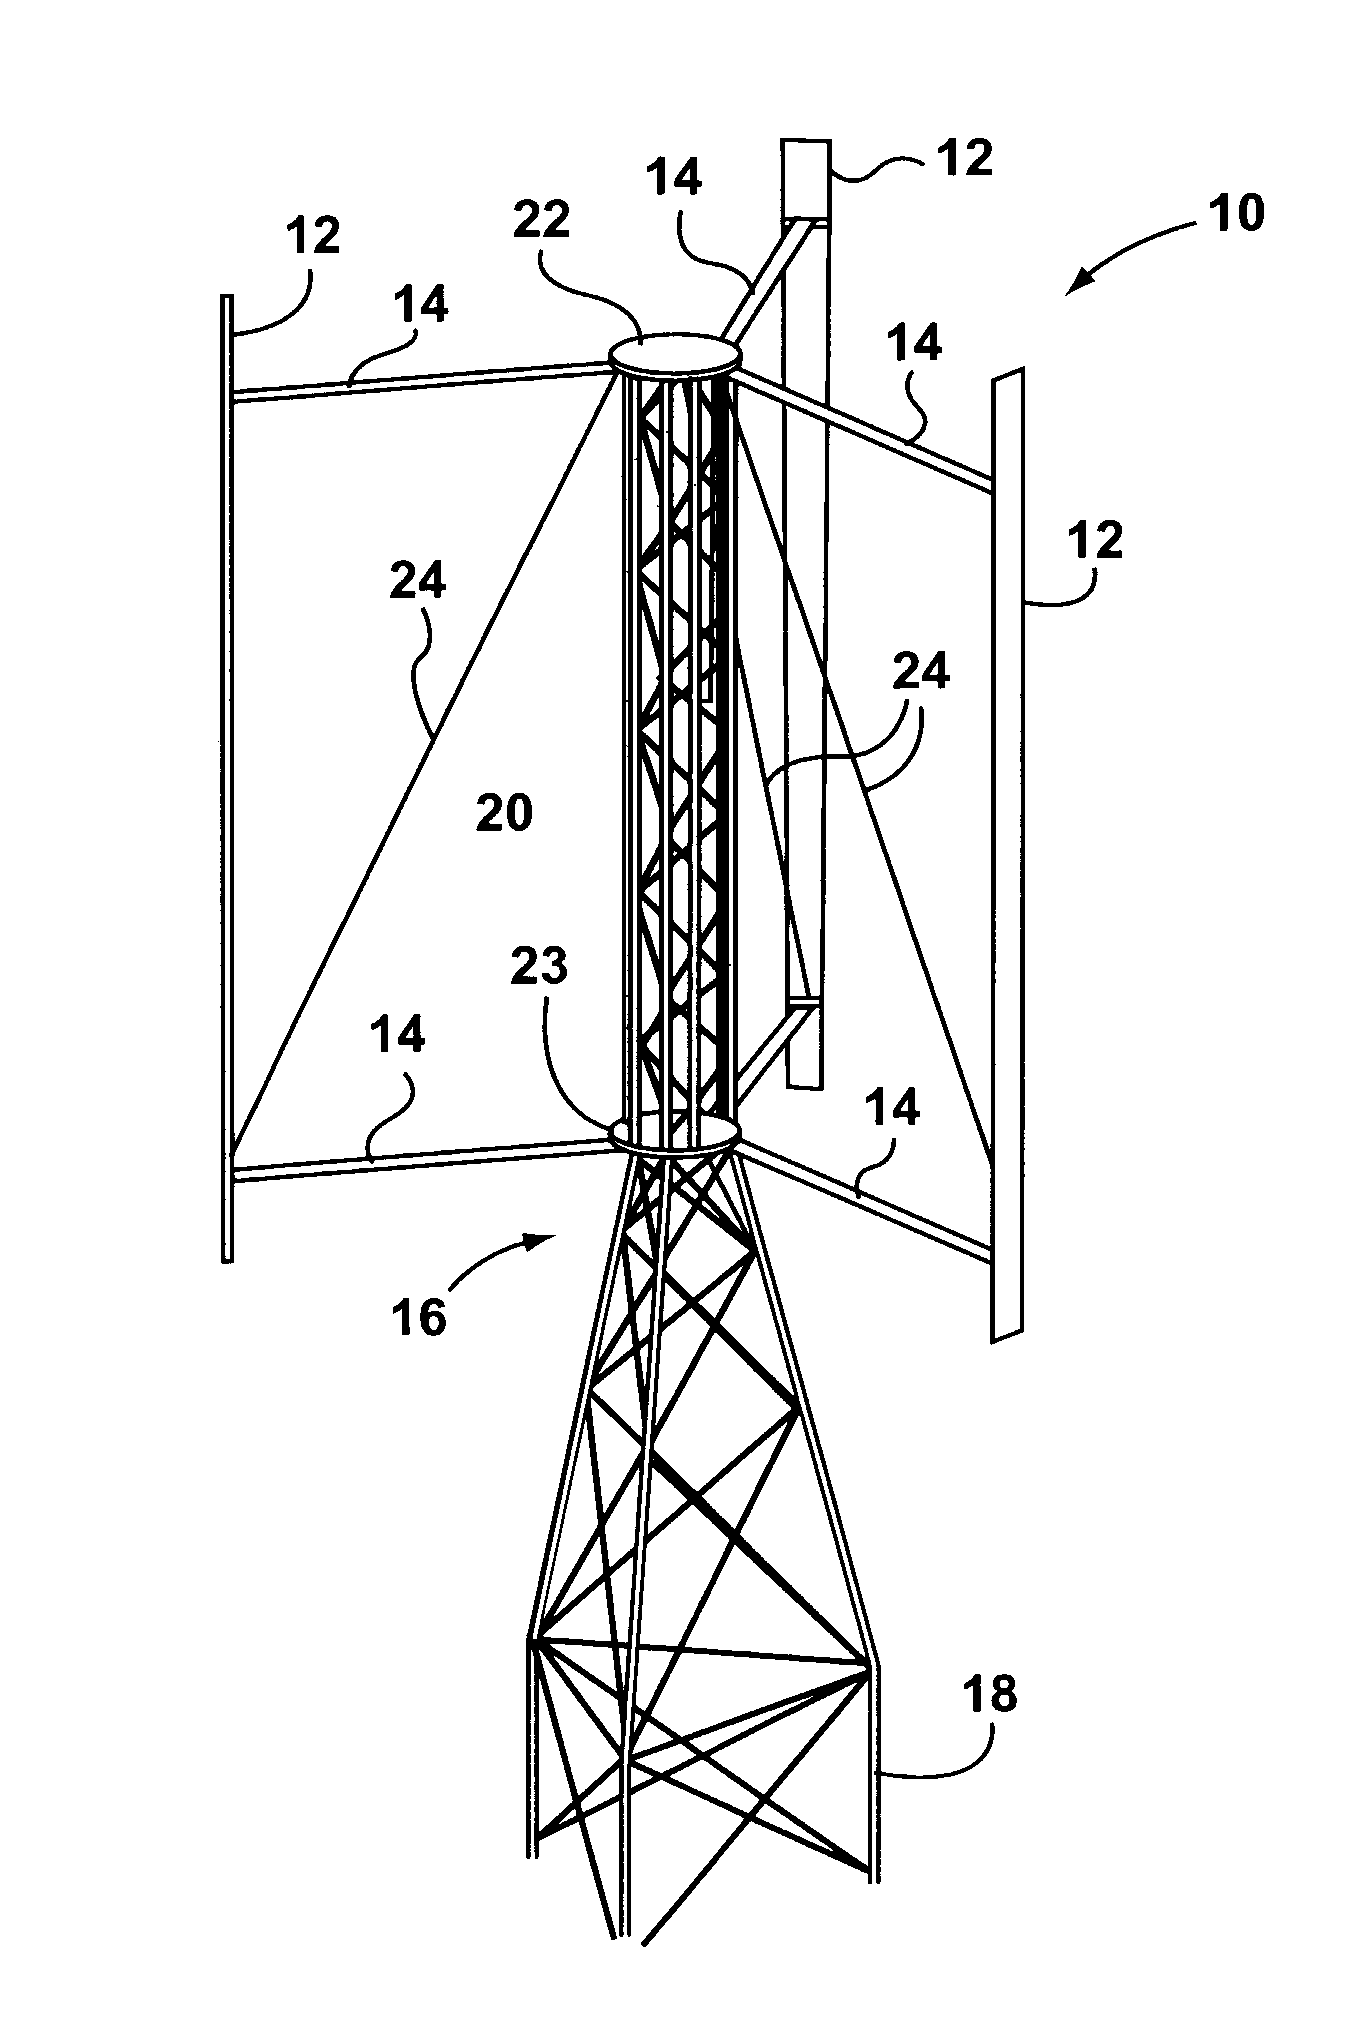 Collapsible vertical-axis turbine